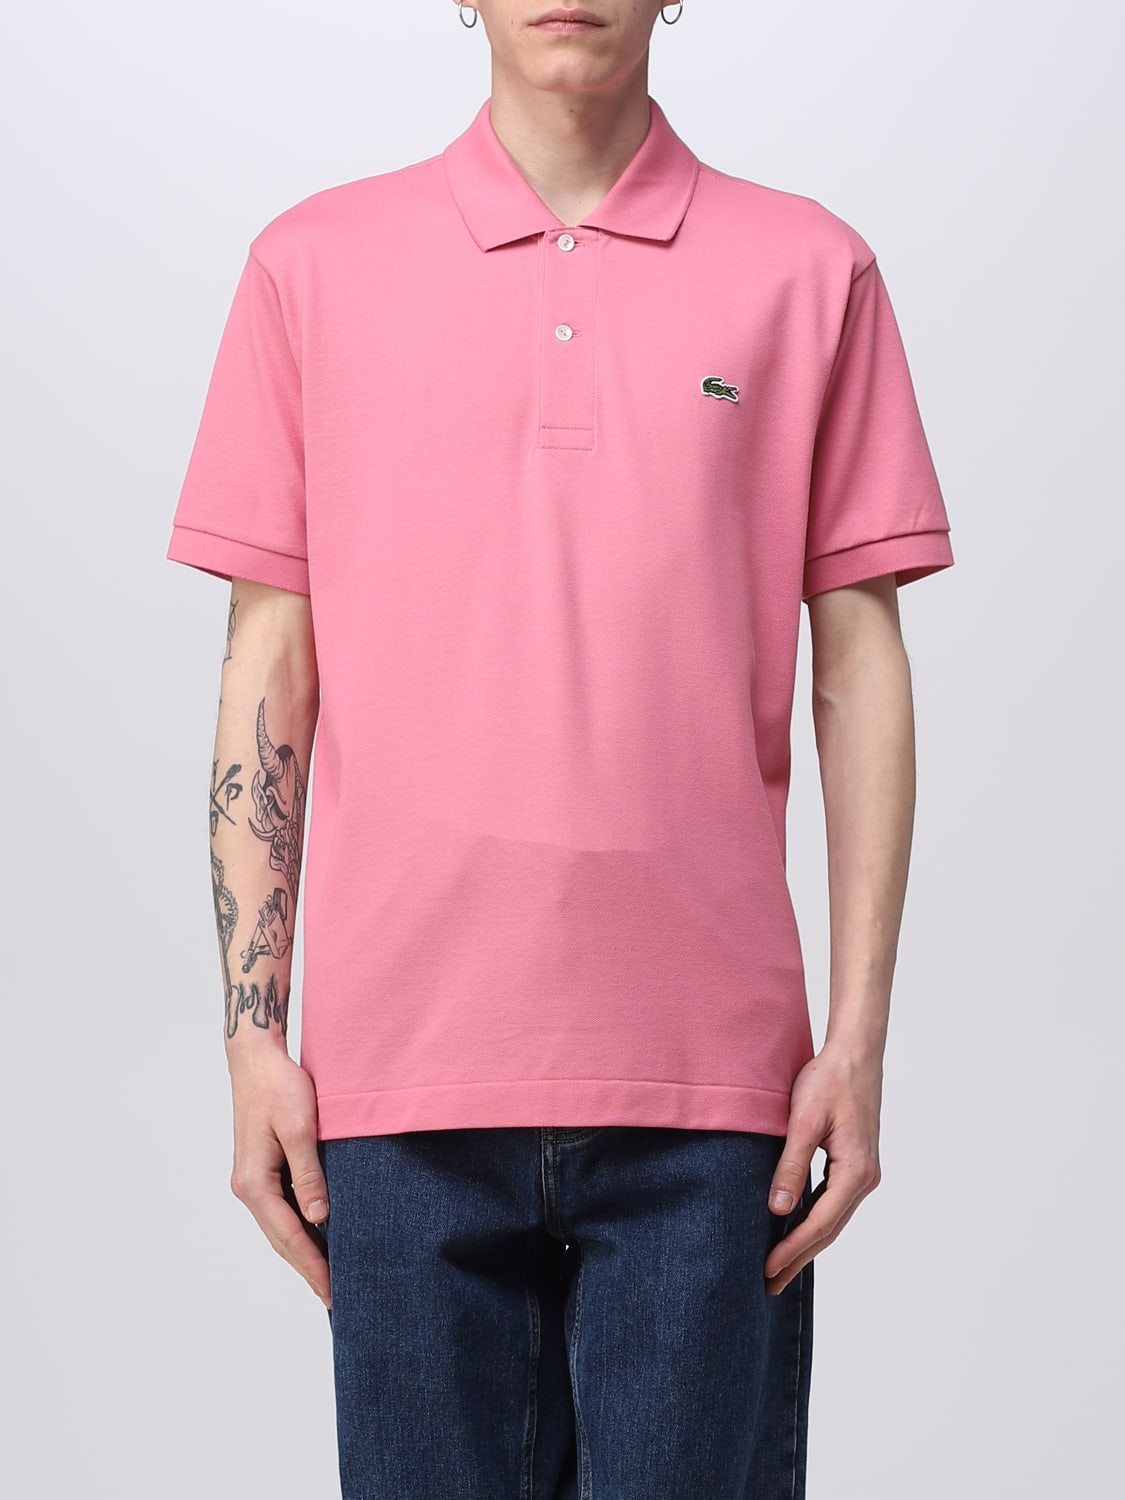 LACOSTE: polo shirt for man - Pink polo AB1212 online at GIGLIO.COM